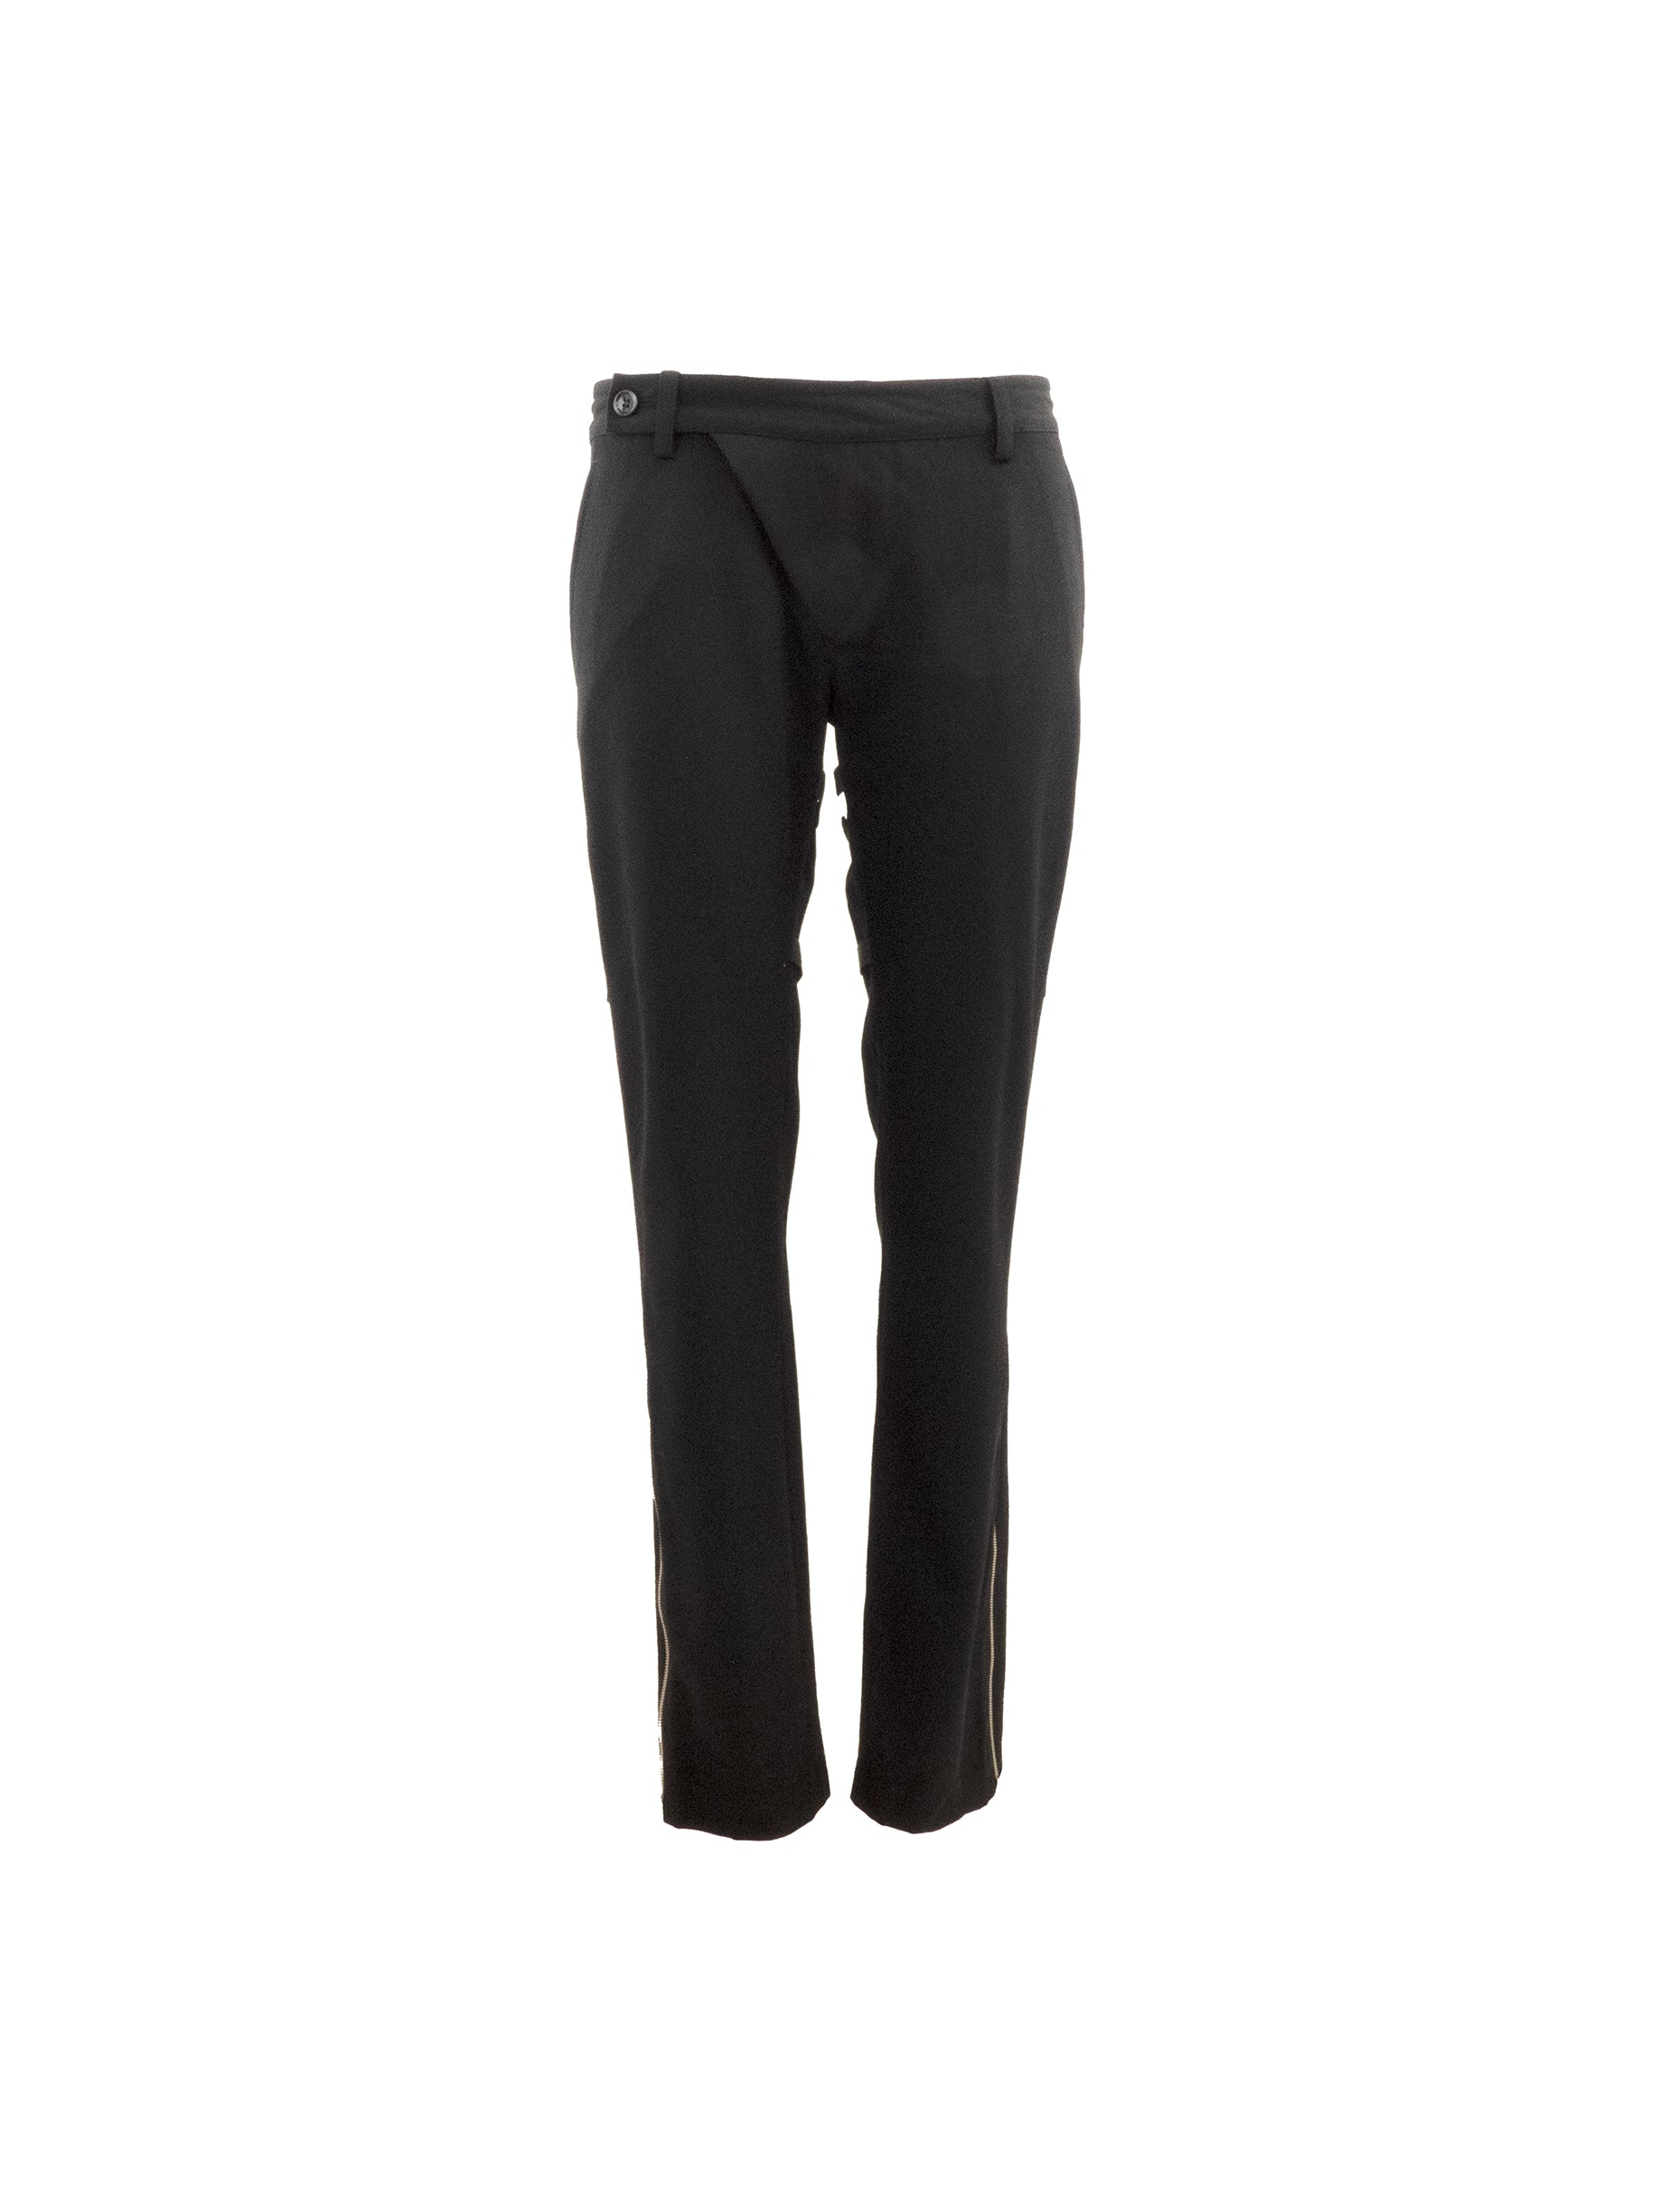 BLACK BUTTONED ZIPPED TROUSERS WITH BONDAGE STRAP